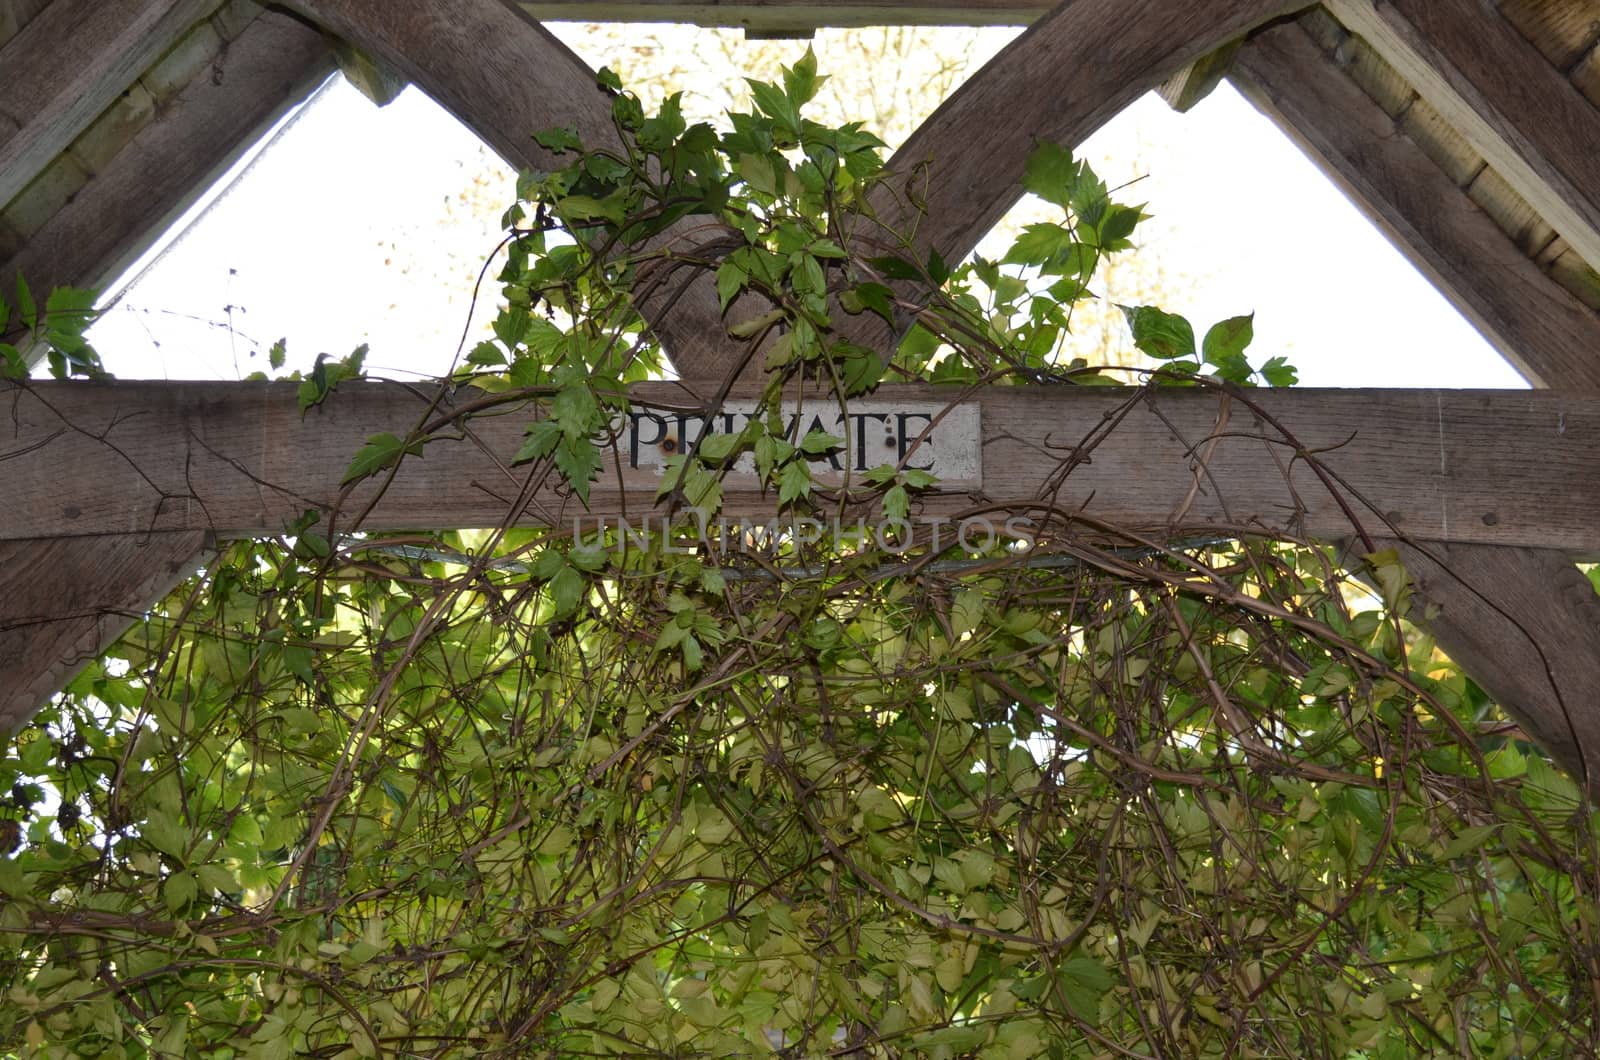 Neglected wooden private sign on a gateway beam.